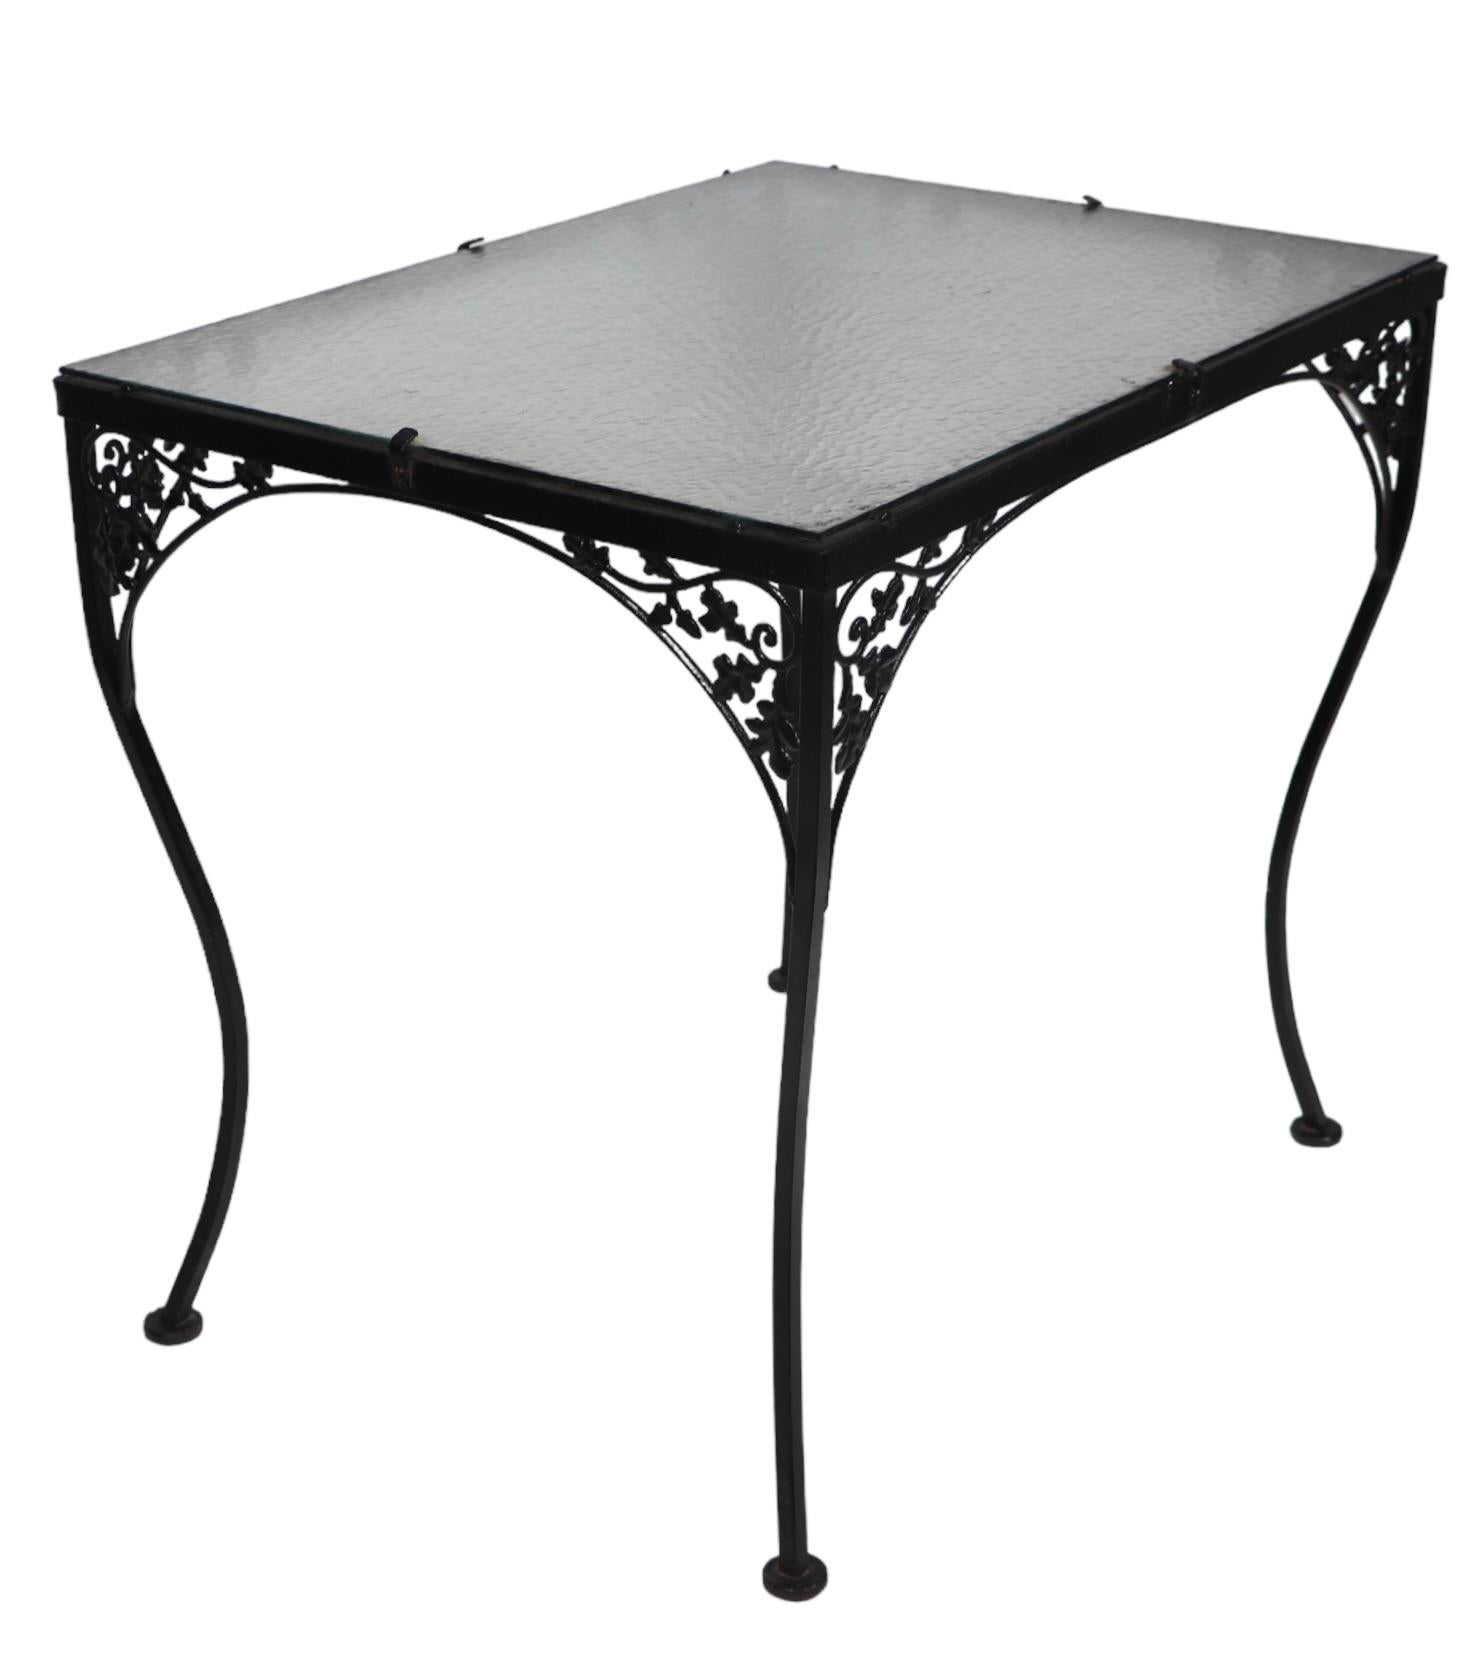 Ornate Wrought Iron and Glass Garden Patio Poolside Dining Table att. to Woodard For Sale 1